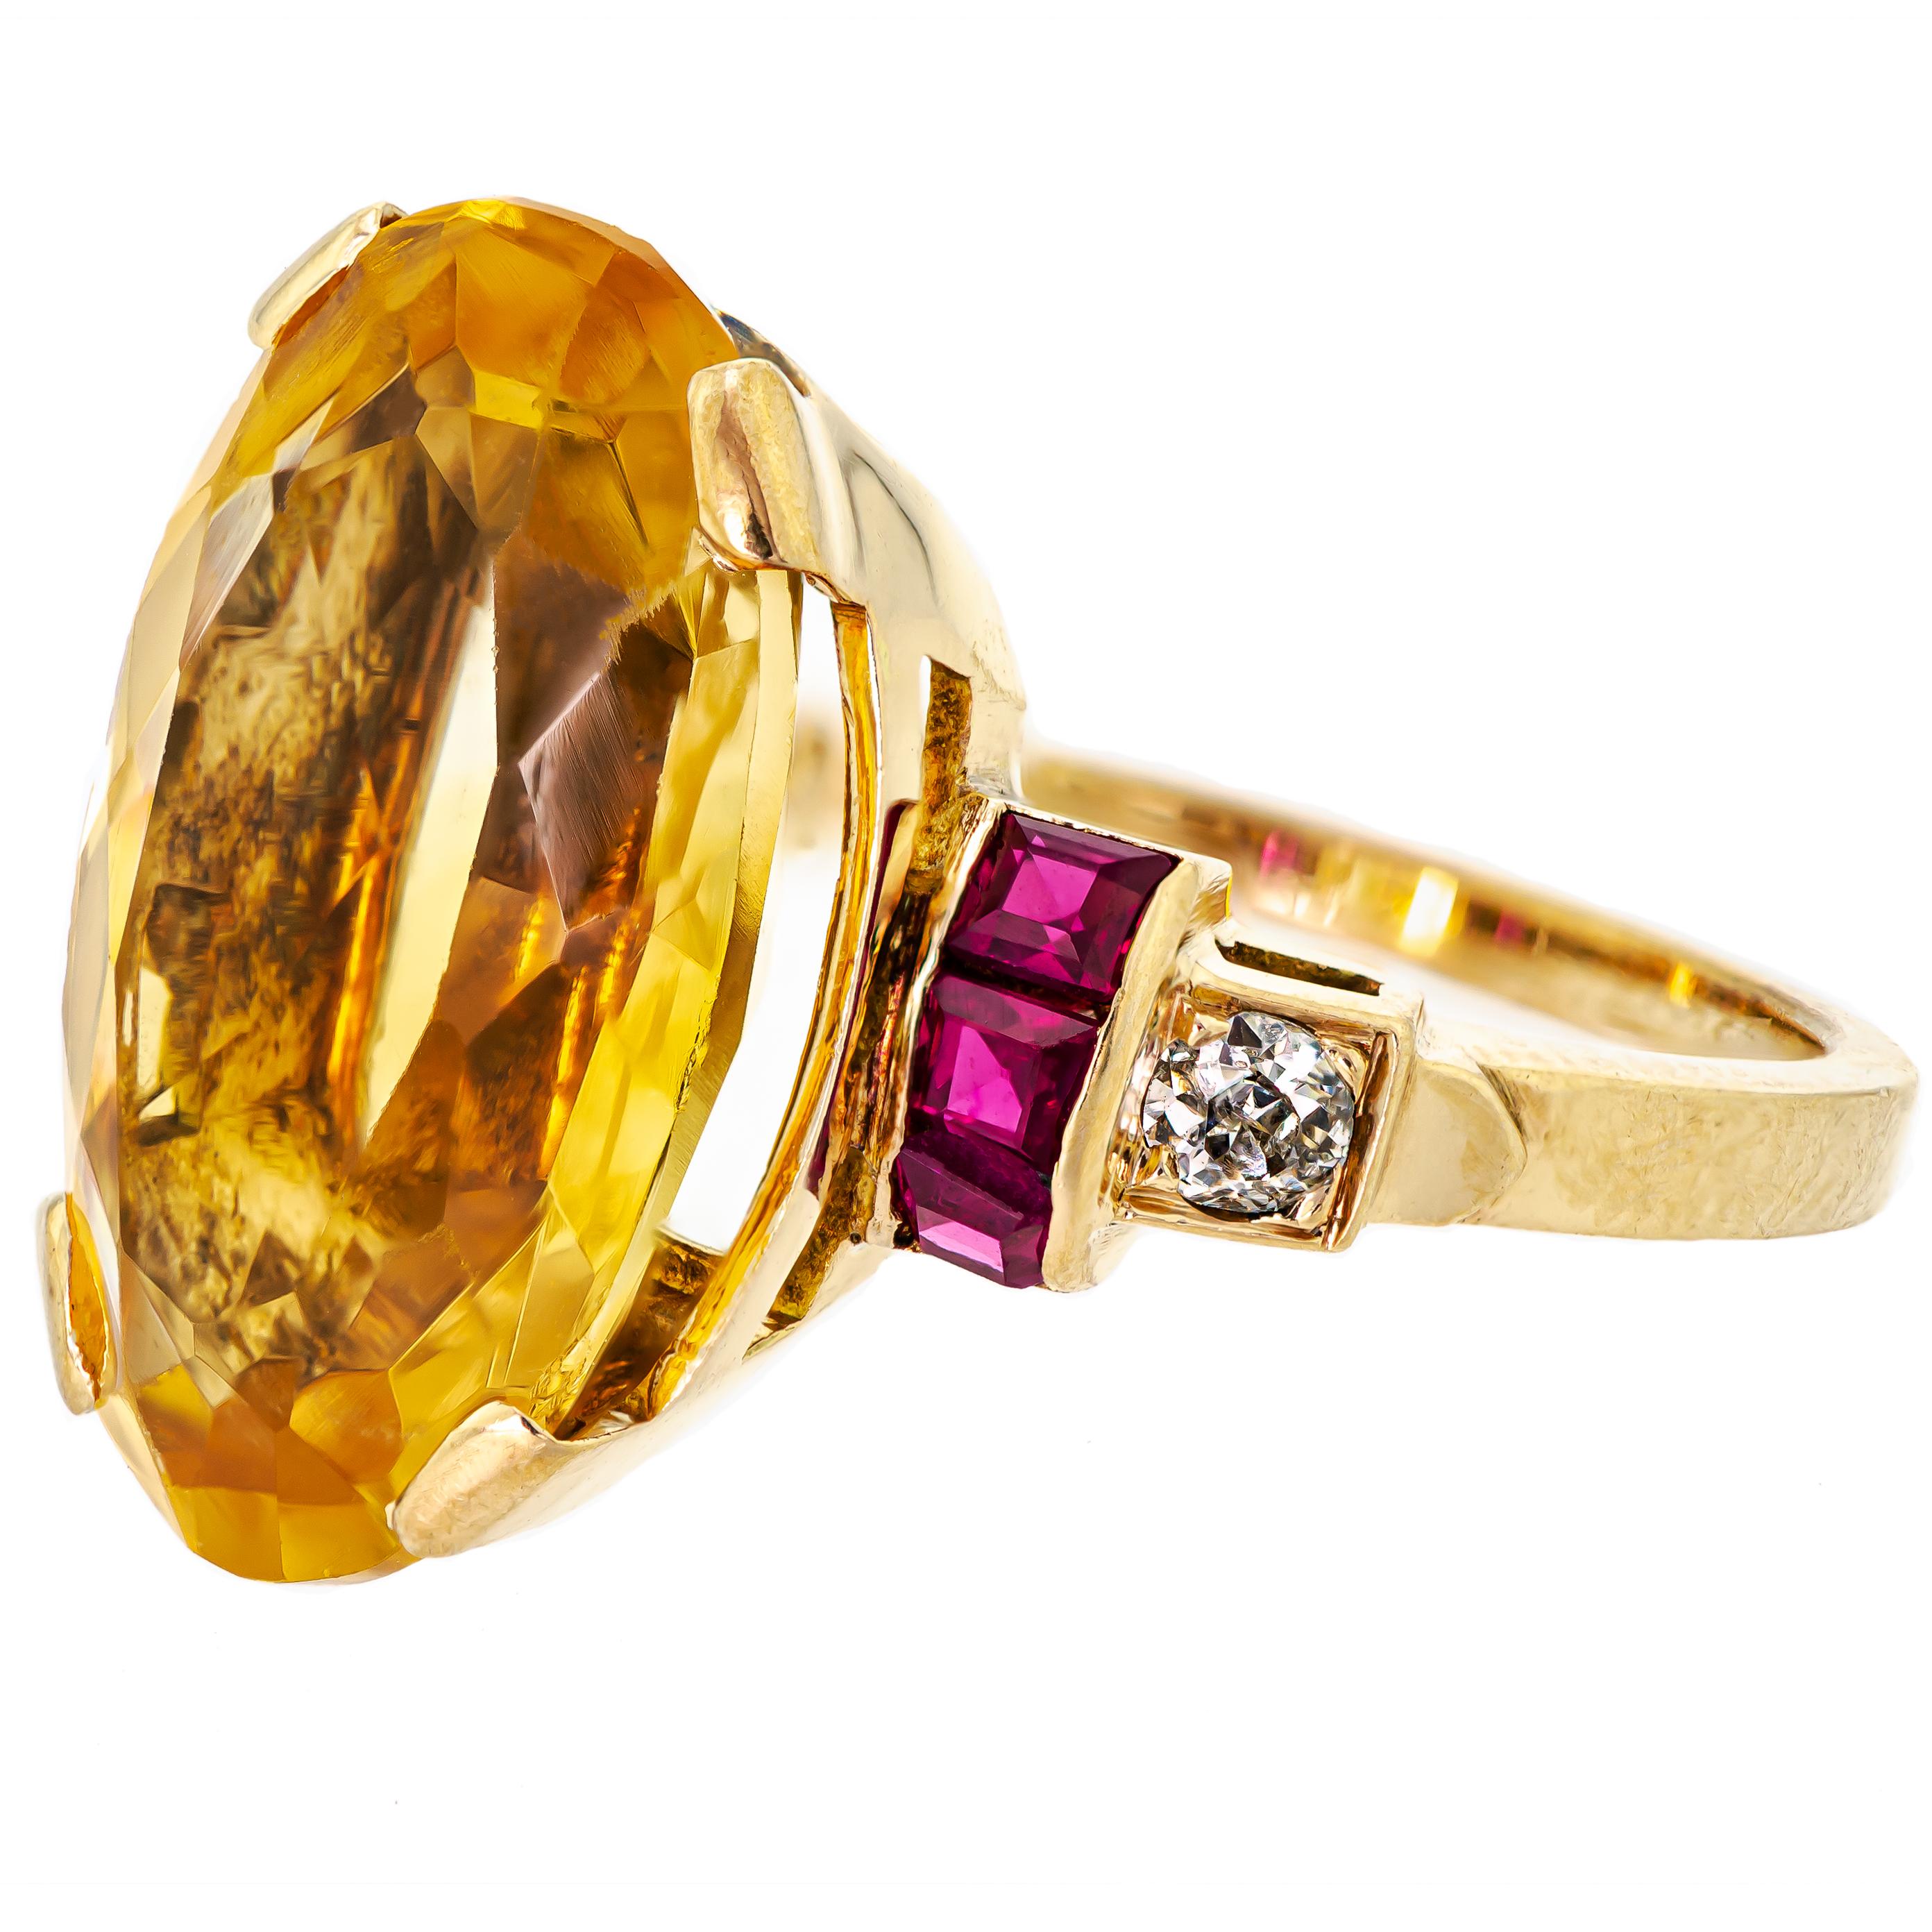 Brilliant Cut Stunning Retro Circa 1940 Citrine Ruby and Diamond and 14KT Yellow Gold Cocktail